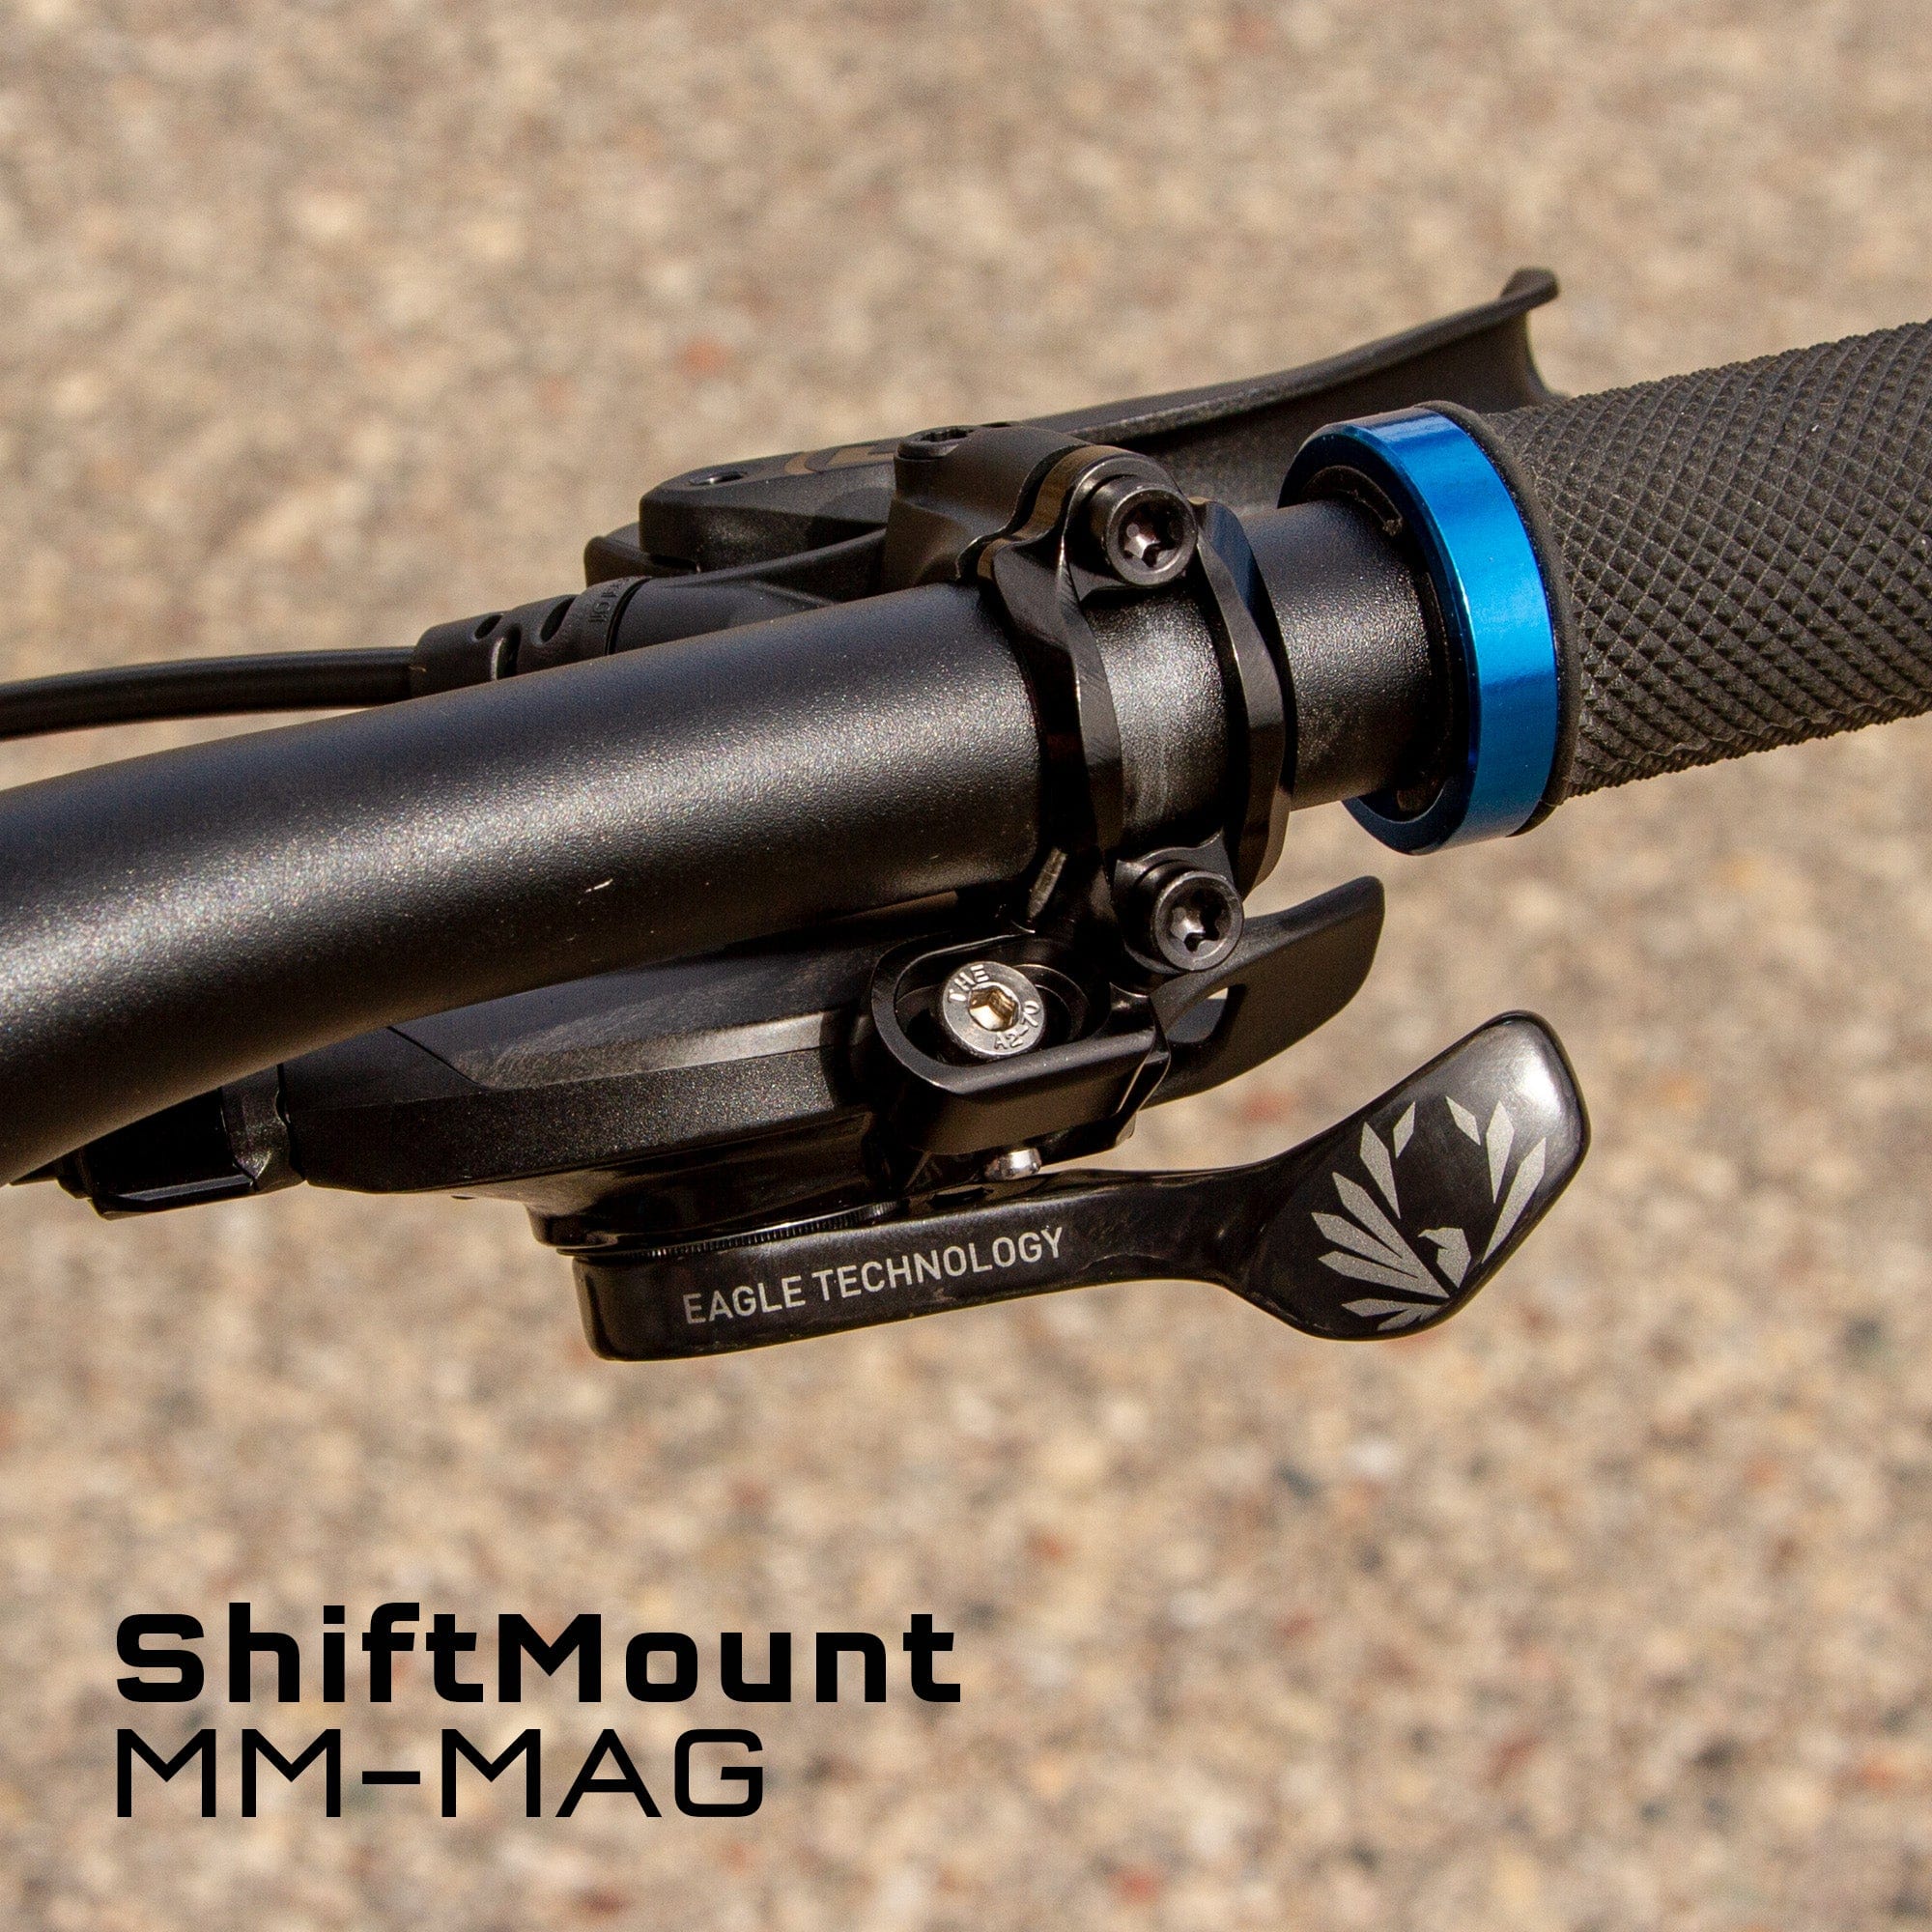 sram shifters with shimano brakes matchmaker